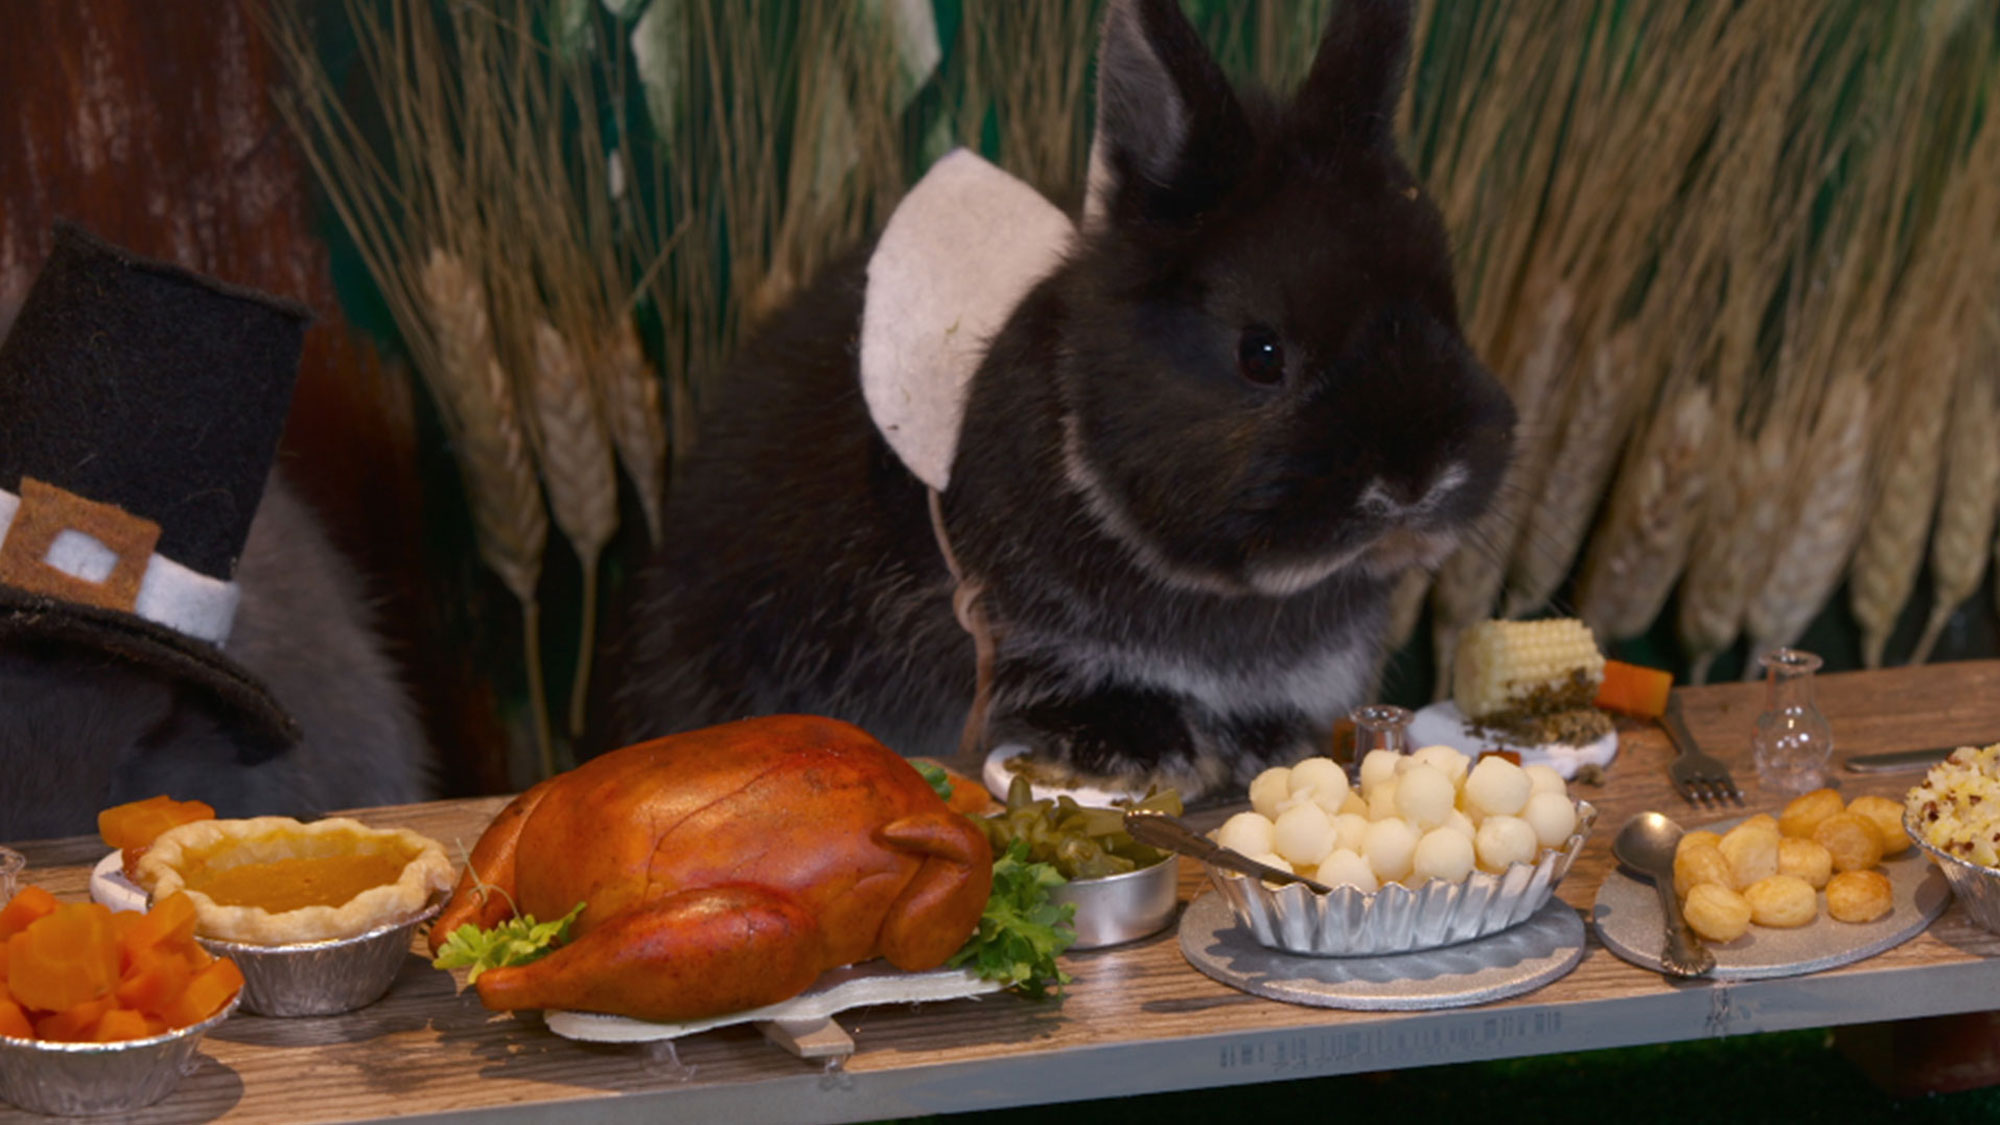 The Story of the First (Bunny) Thanksgiving